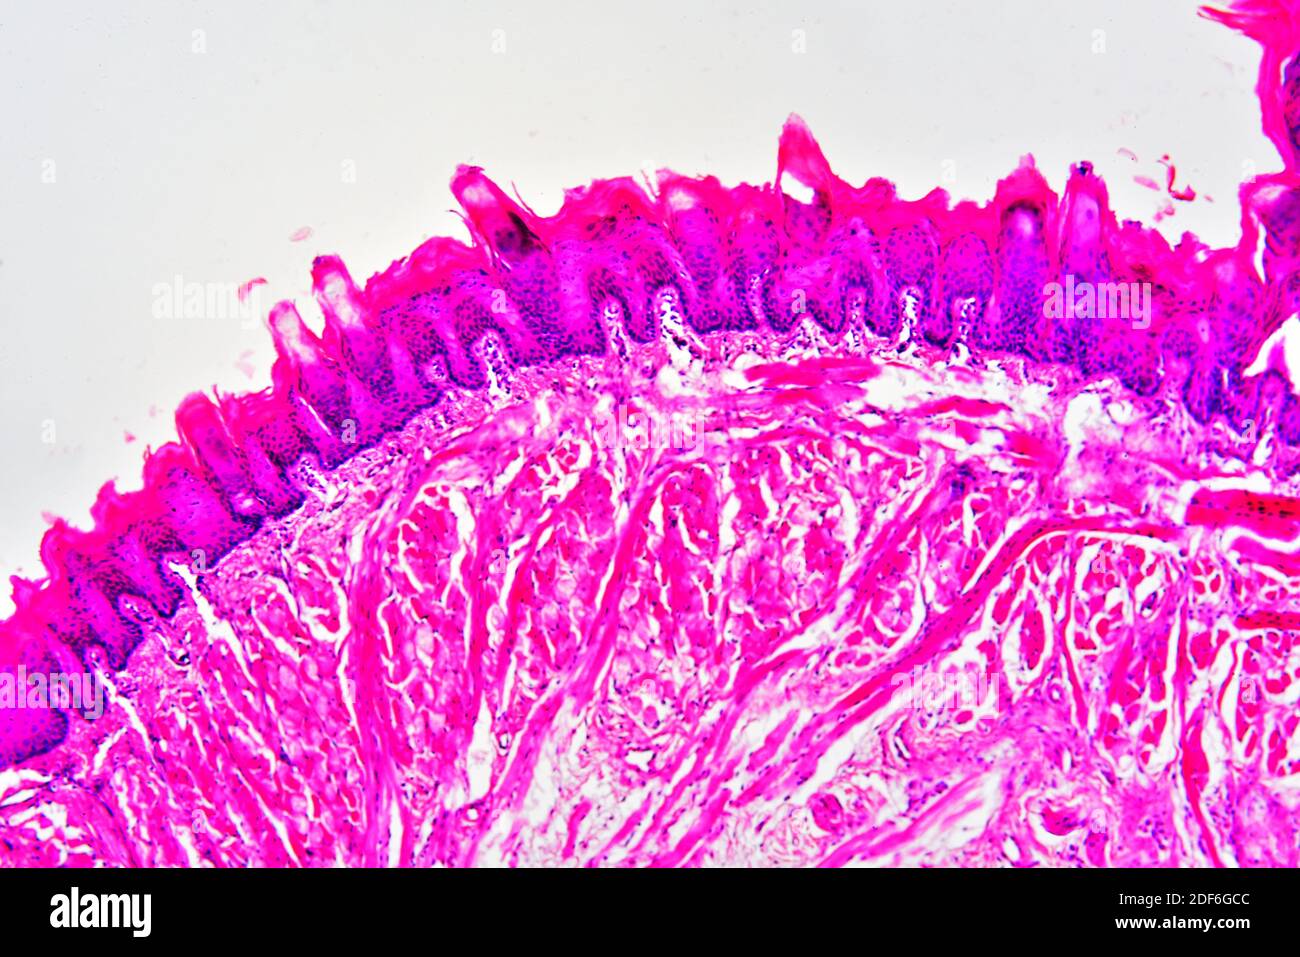 Tongue section showing lingual papillae, taste buds, striated muscles, gustatory glands and connective tissue. Optical microscope X100. Stock Photo